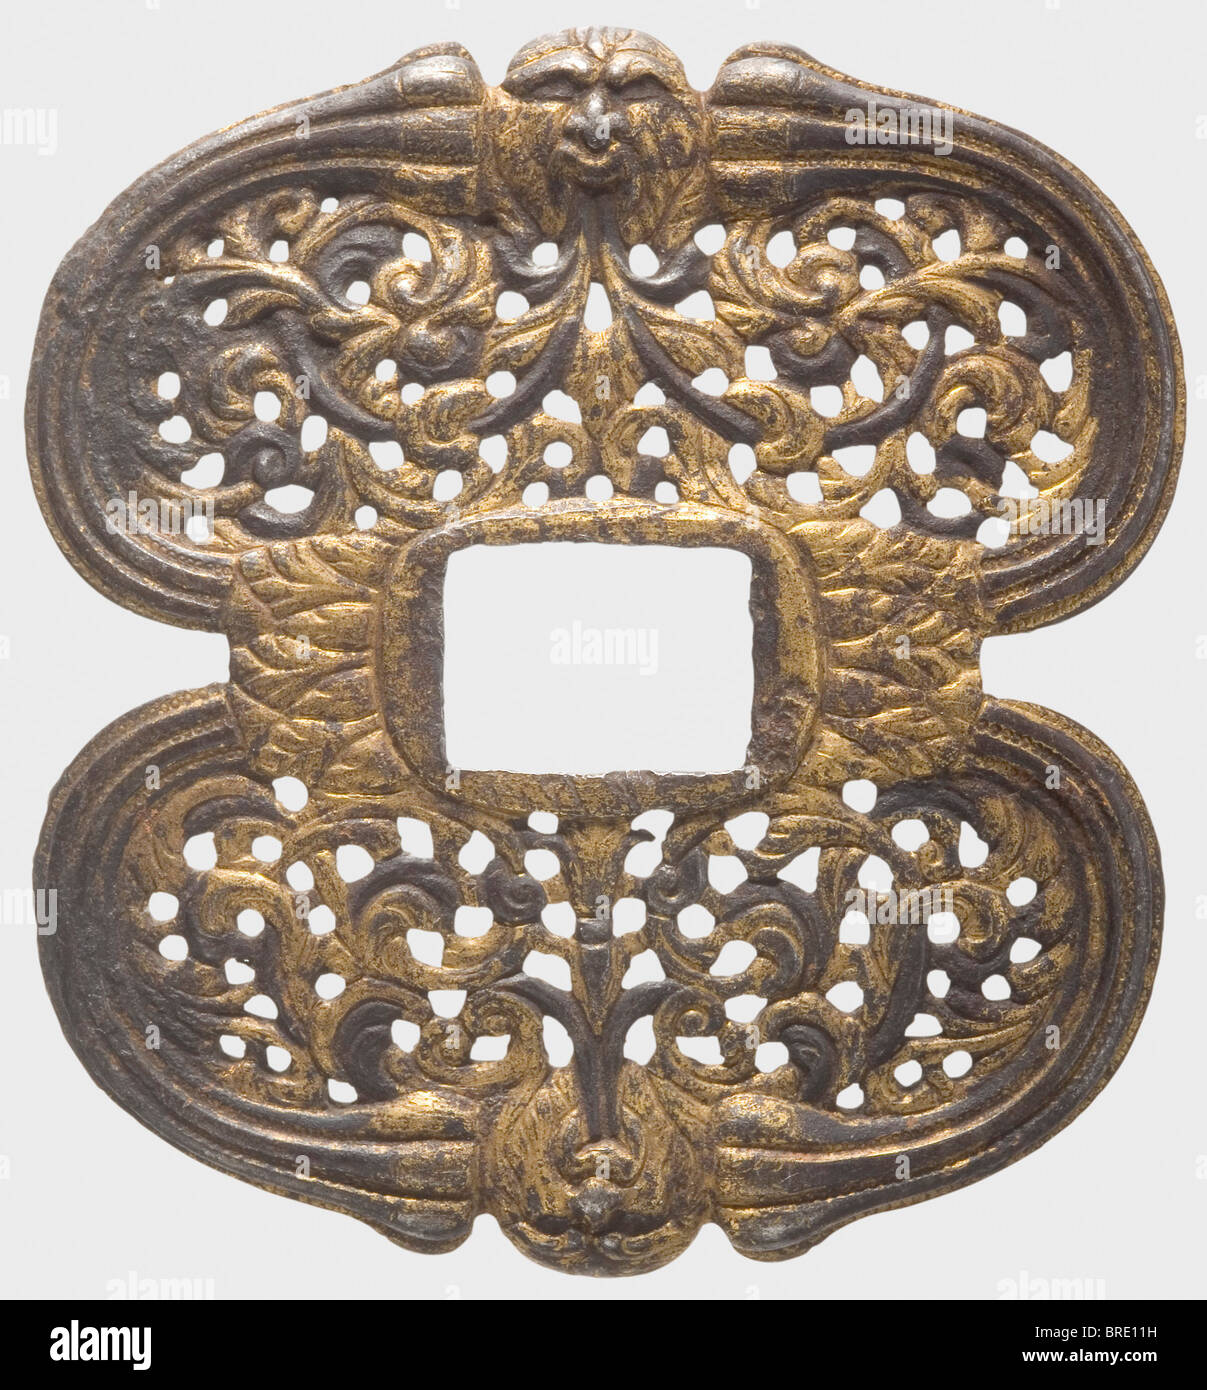 A French double shell-guard for a small-sword, circa 1740 Gilt iron guard with openwork floral designs and chiselled with grotesque masks on the rims on both sides. Width 6.7 cm. historic, historical, 18th century, dress sword, swords, thrusting, thrustings, smallsword, epee de cour, weapon, arms, weapons, arms, military, militaria, object, objects, stills, clipping, clippings, cut out, cut-out, cut-outs, Stock Photo